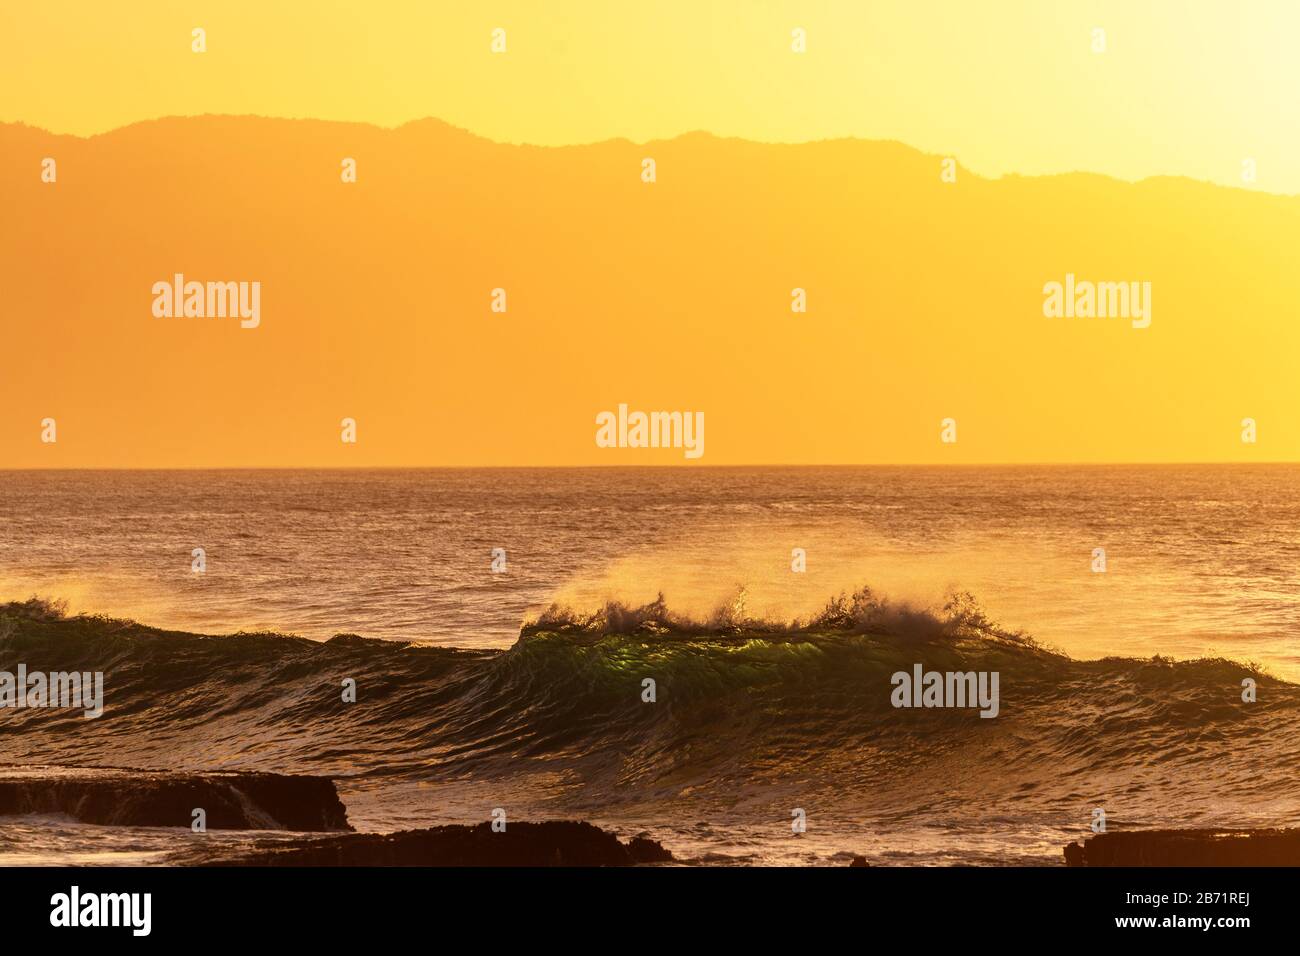 United States of America, Hawaii, Oahu island, waves on the North Shore at sunset Stock Photo